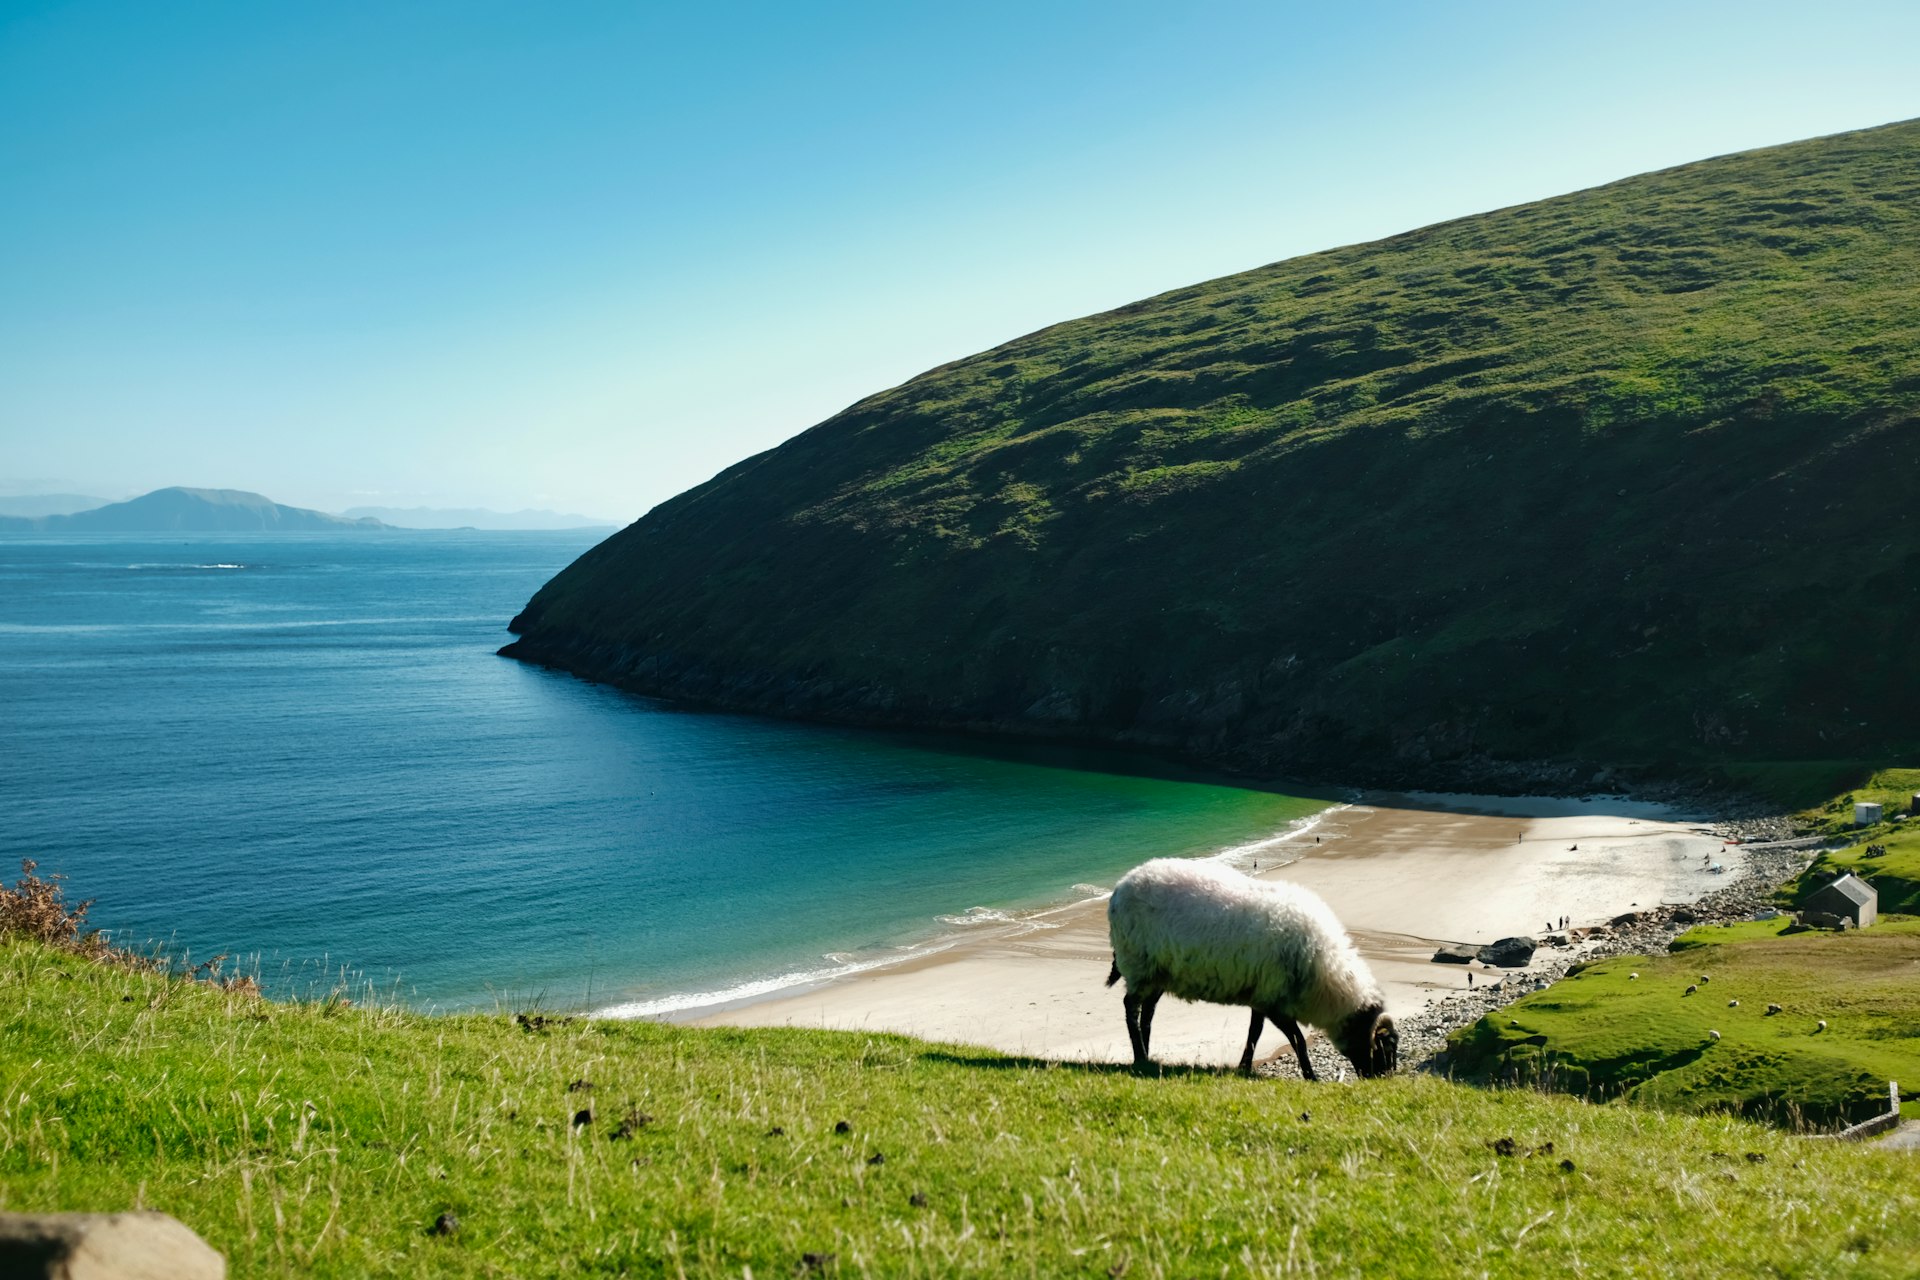 Keem Beach (Bay) Landscape view, Keem, Achill Island, Co Mayo, Ireland with a sheep in the foreground